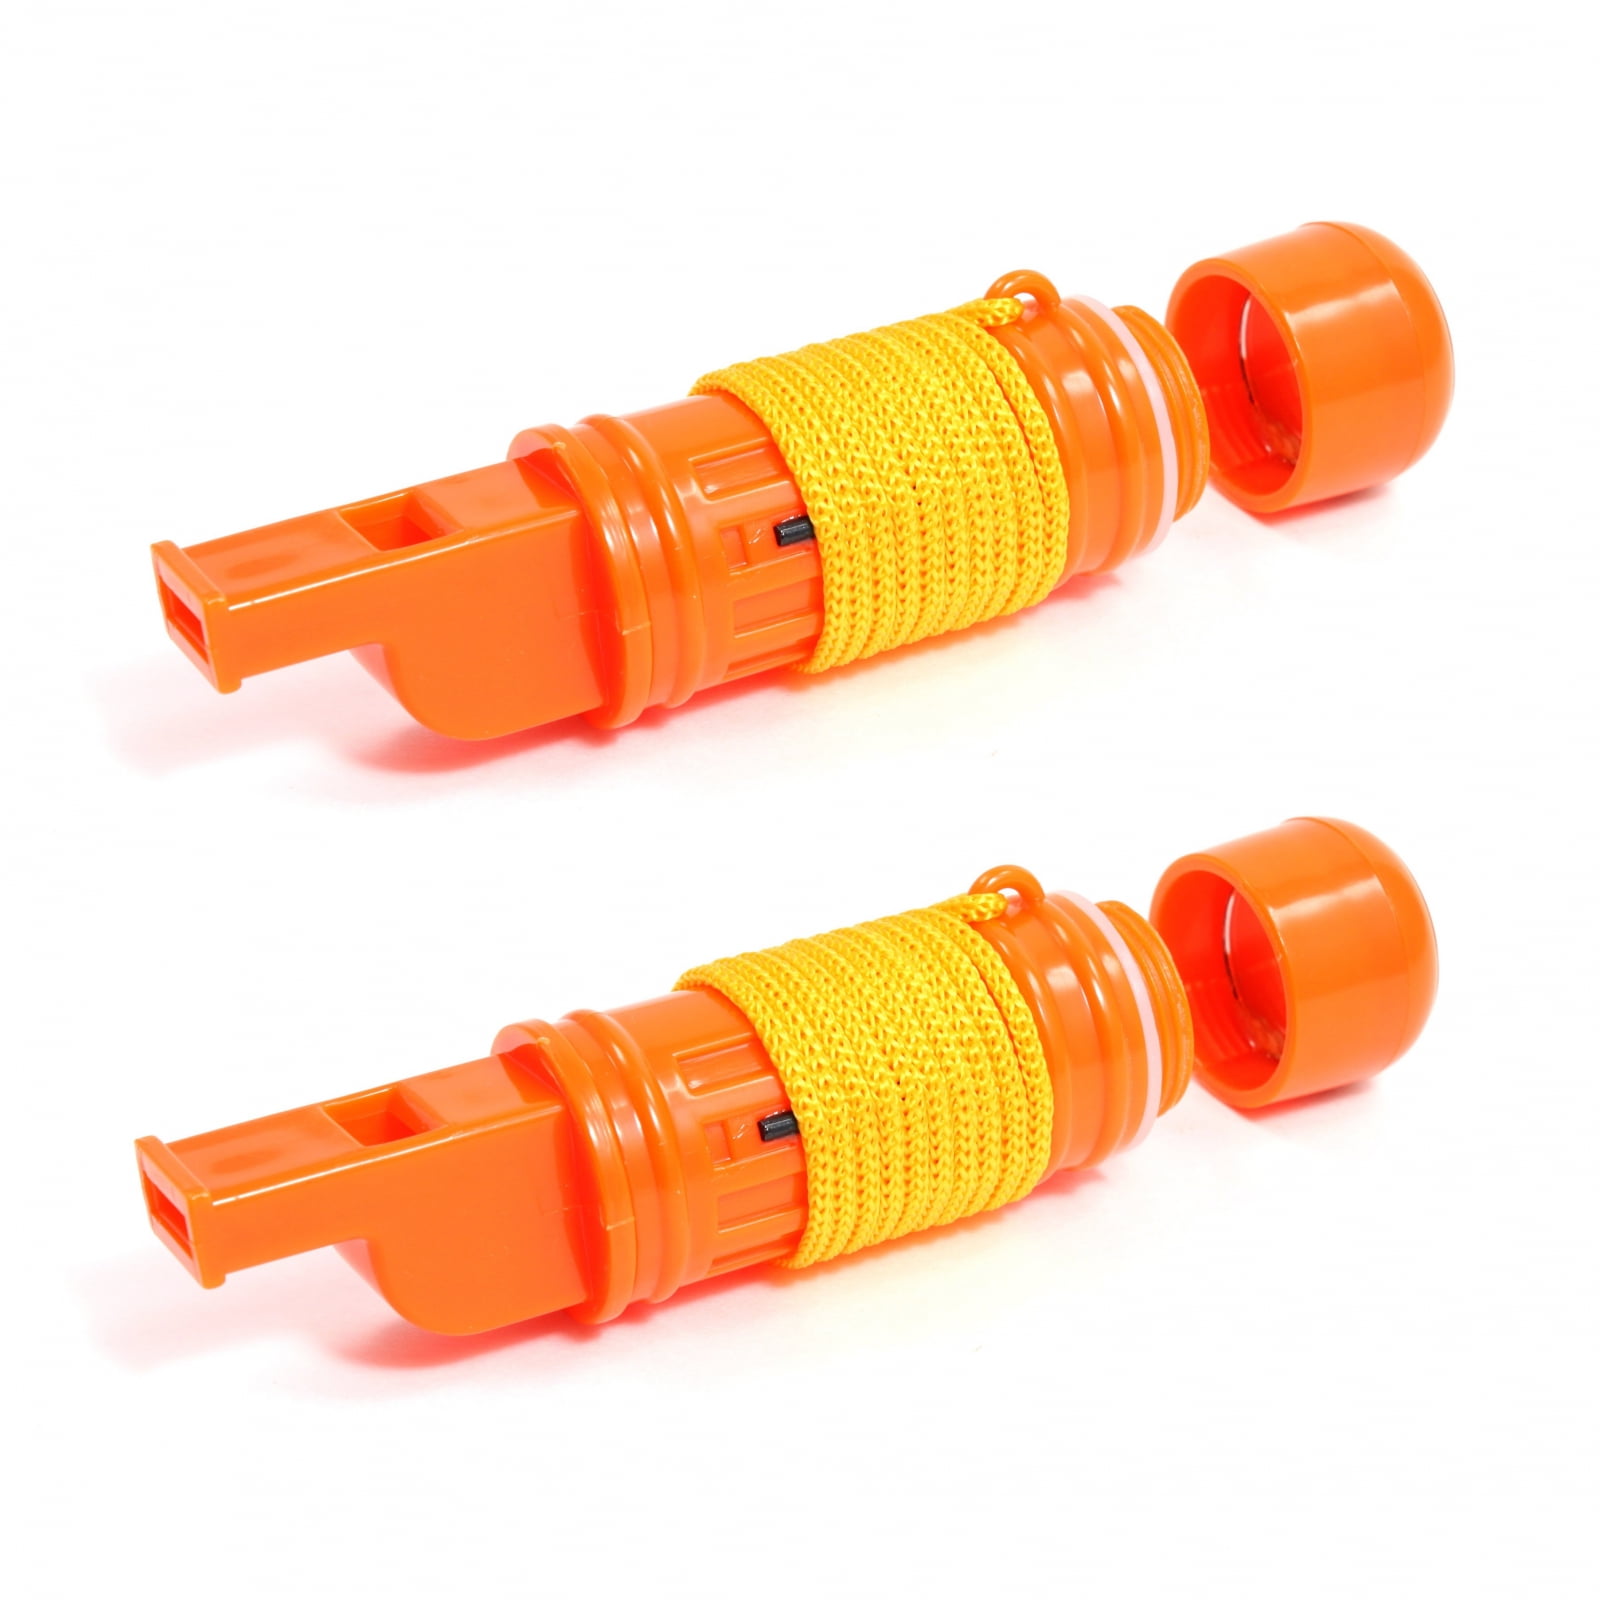 3 Pcs Waterproof Single Chamber Whistle Aluminum Alloy Emergency Safety Whistle Tools of Life for Hike Camp Survival Games